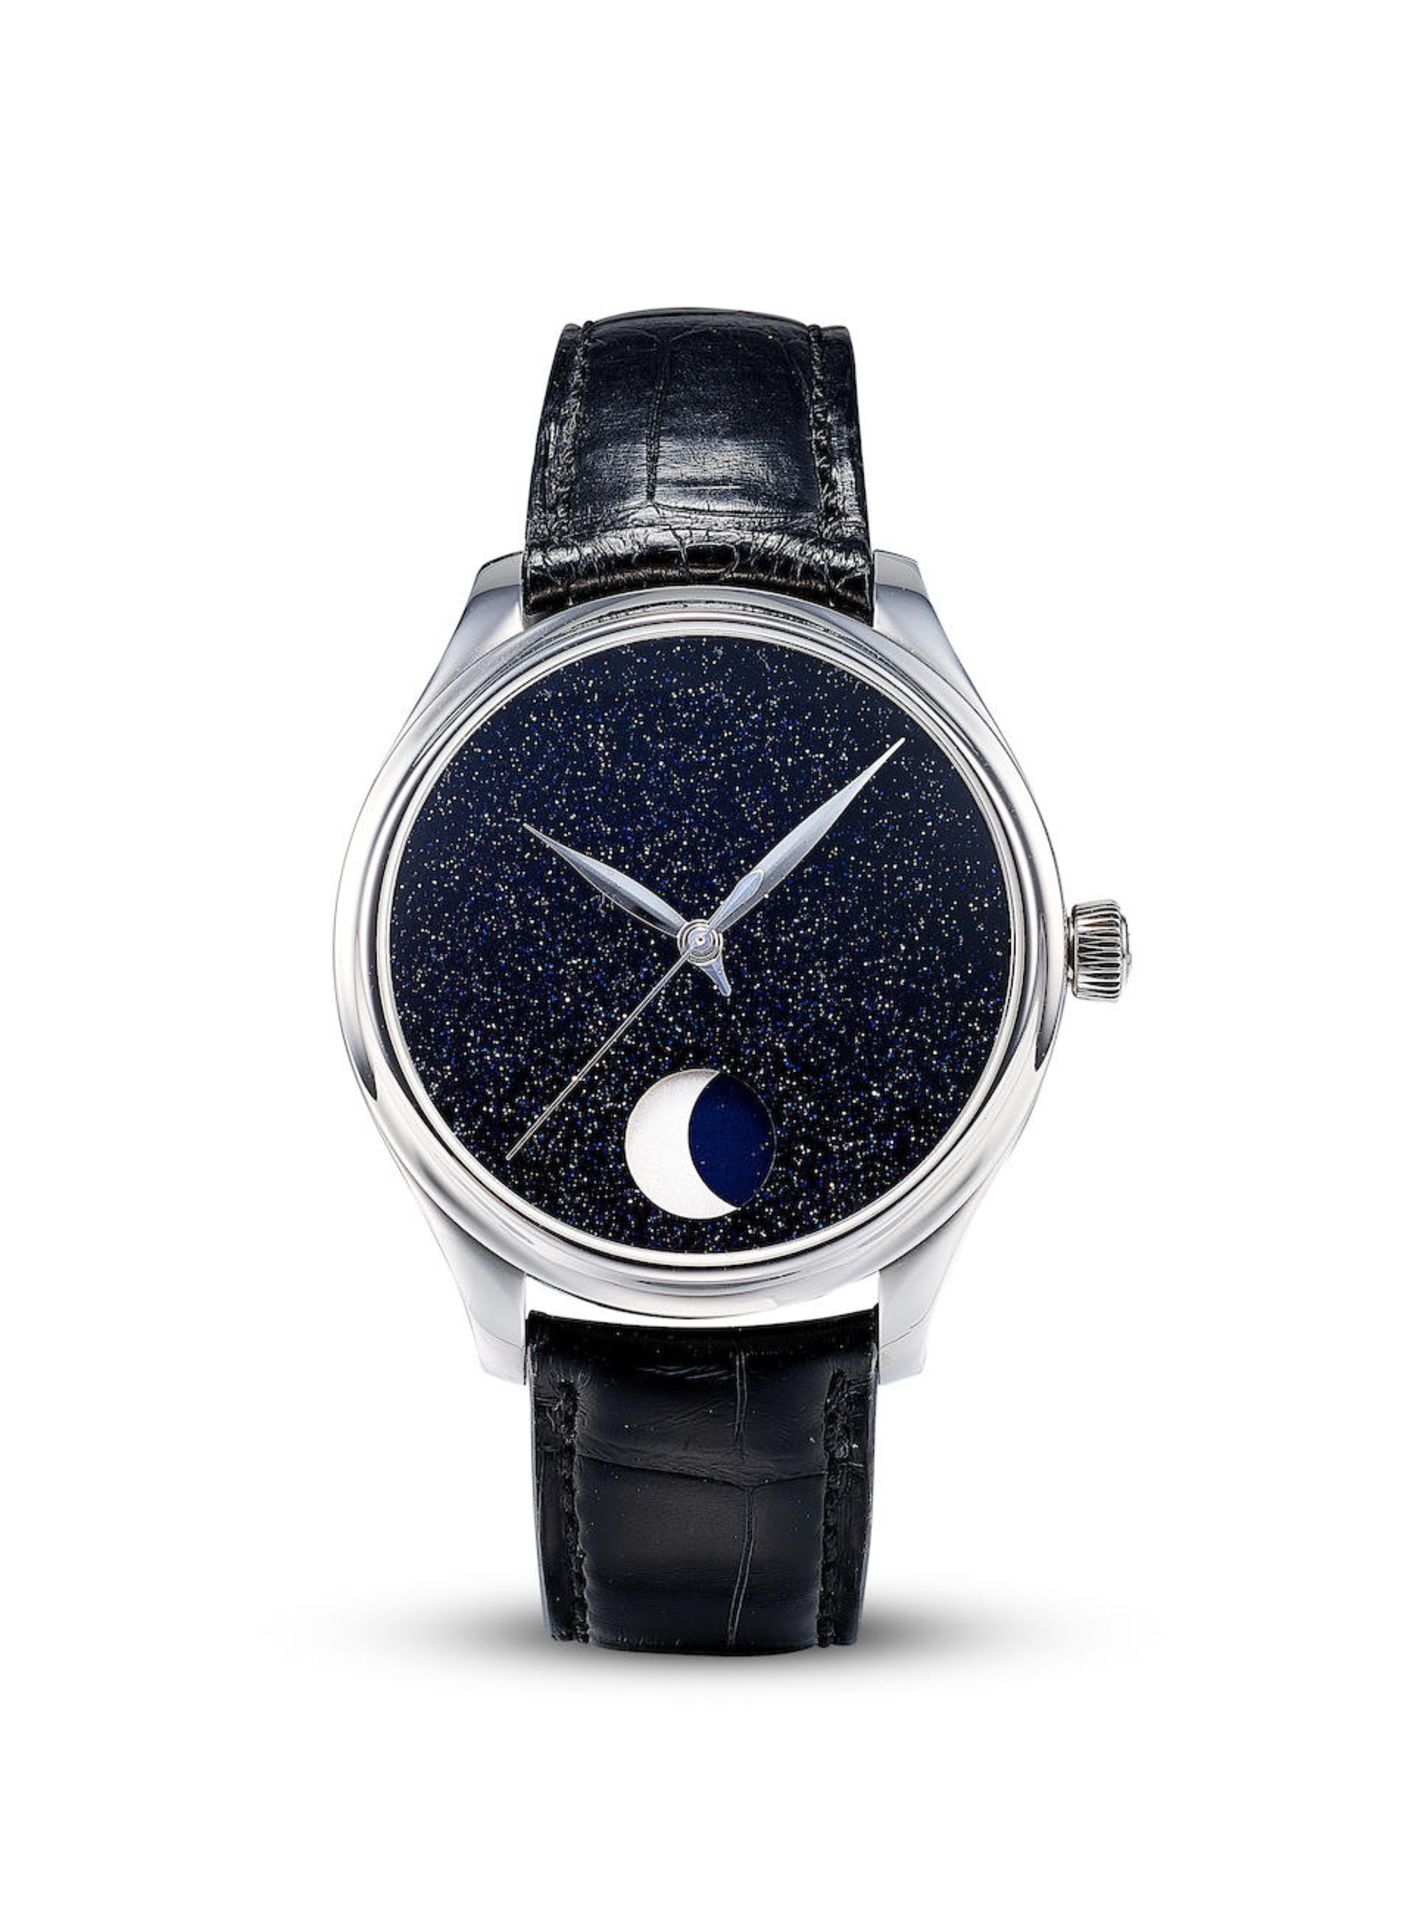 H. MOSER & CIE | ENDEAVOUR PERPETUAL MOON, REF.1801-1201, A RARE LIMITED EDITION STAINLESS STEEL...